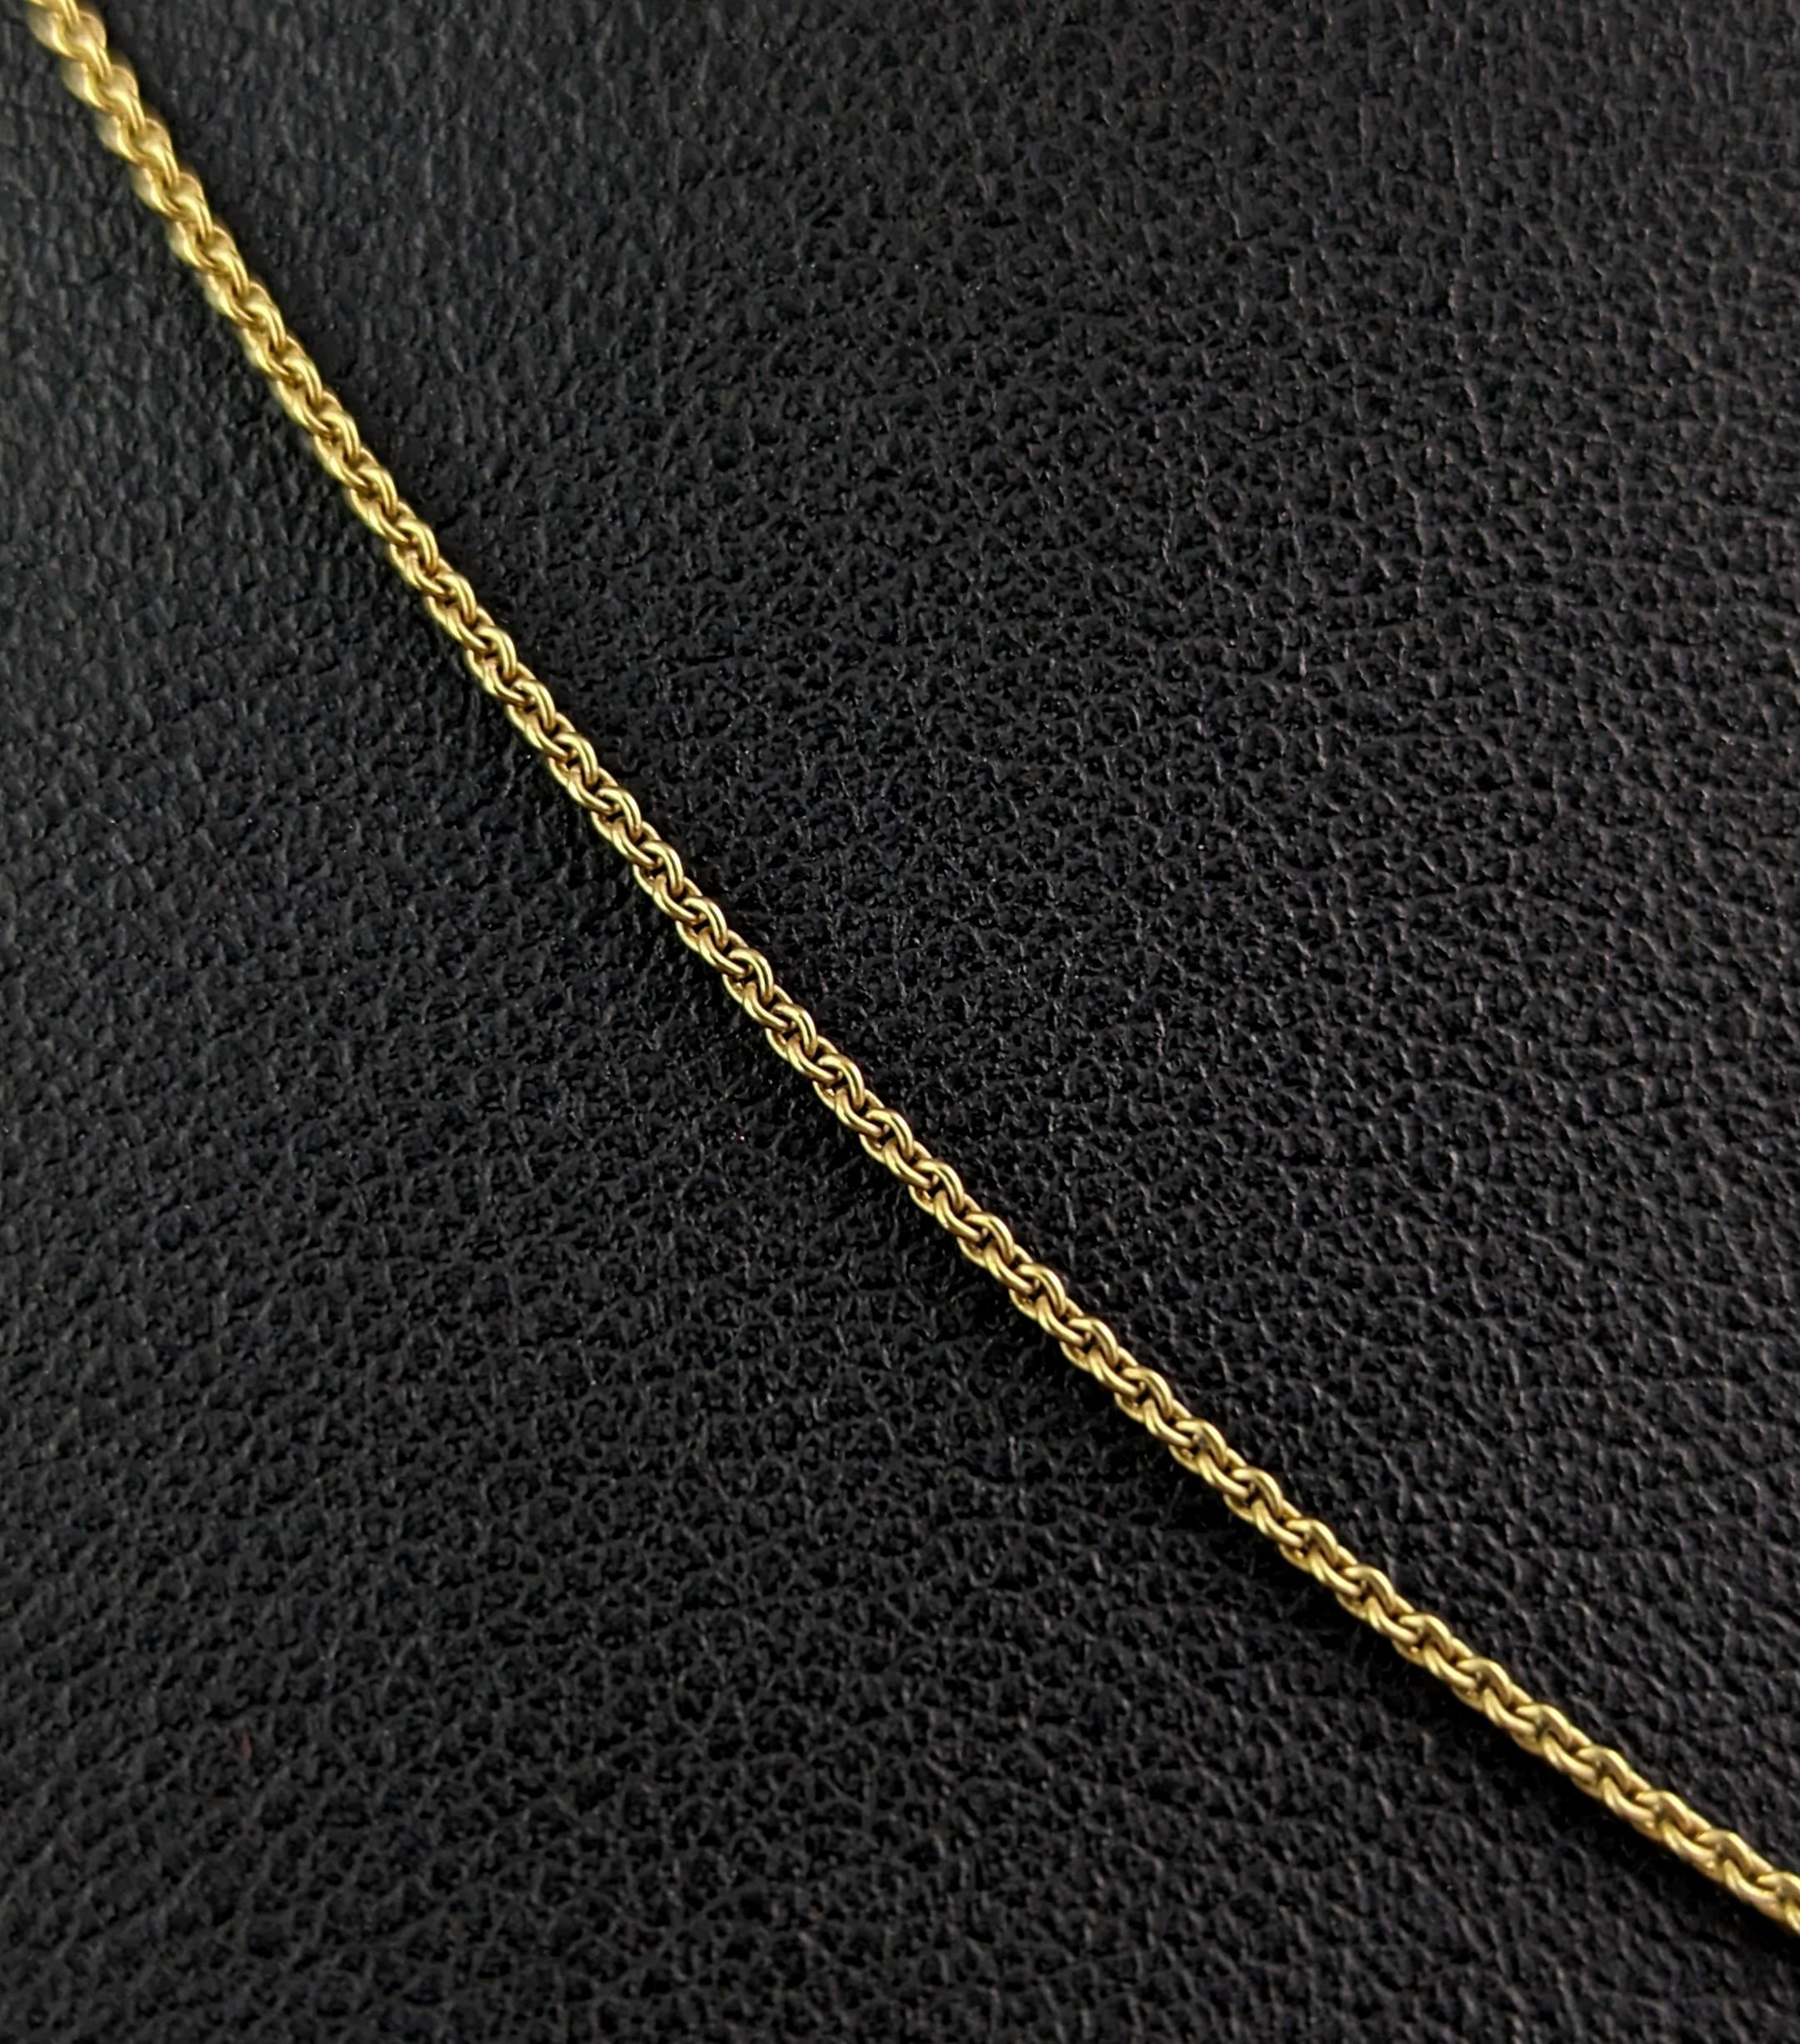 Antique 15k gold trace link chain necklace, dainty, Edwardian  For Sale 1